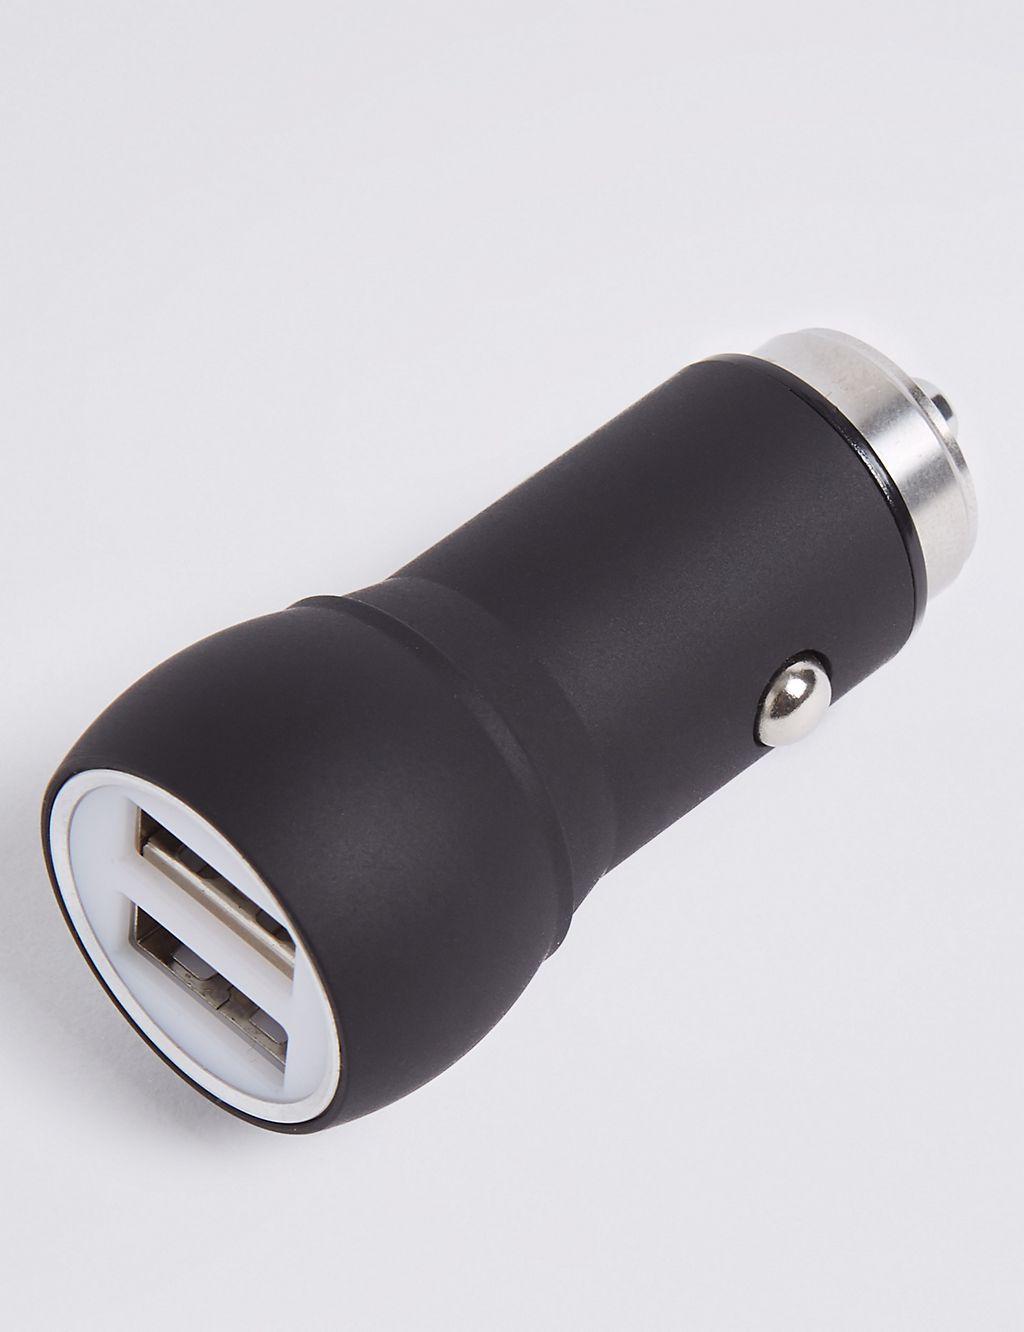 USB Car Charger 2 of 4